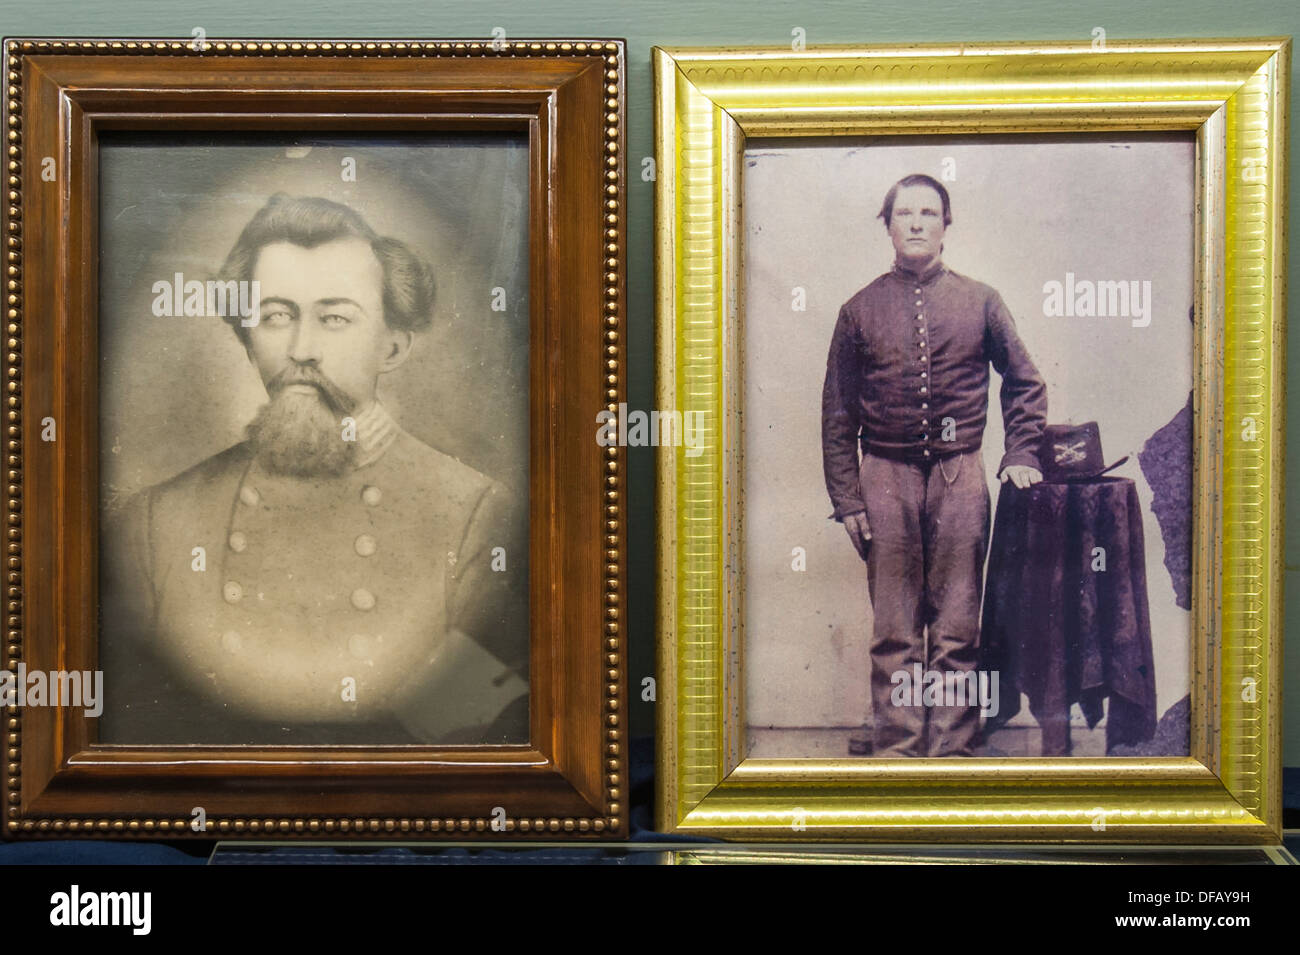 Civil War photographic photograph exhibits at the Port of O'Plymouth Roanoke River Museum Plymouth North Carolina, USA. Stock Photo